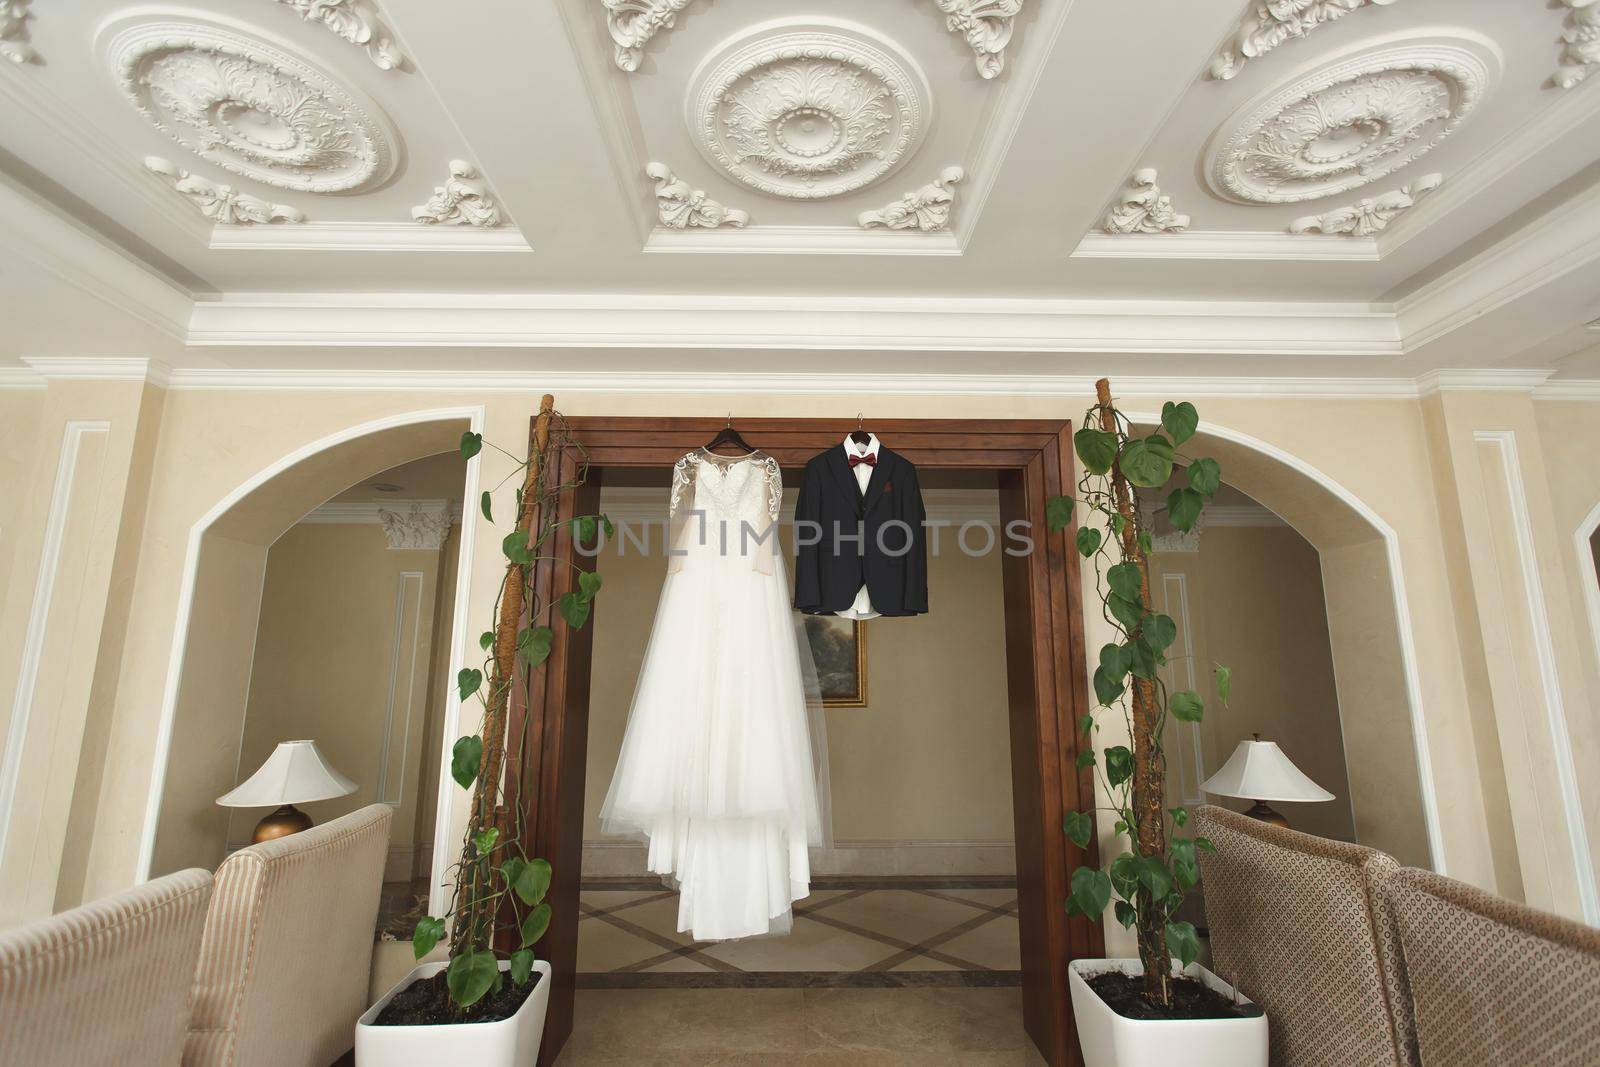 The bride's wedding dress and the groom's jacket on wooden hangers, hang on the wardrobe by StudioPeace